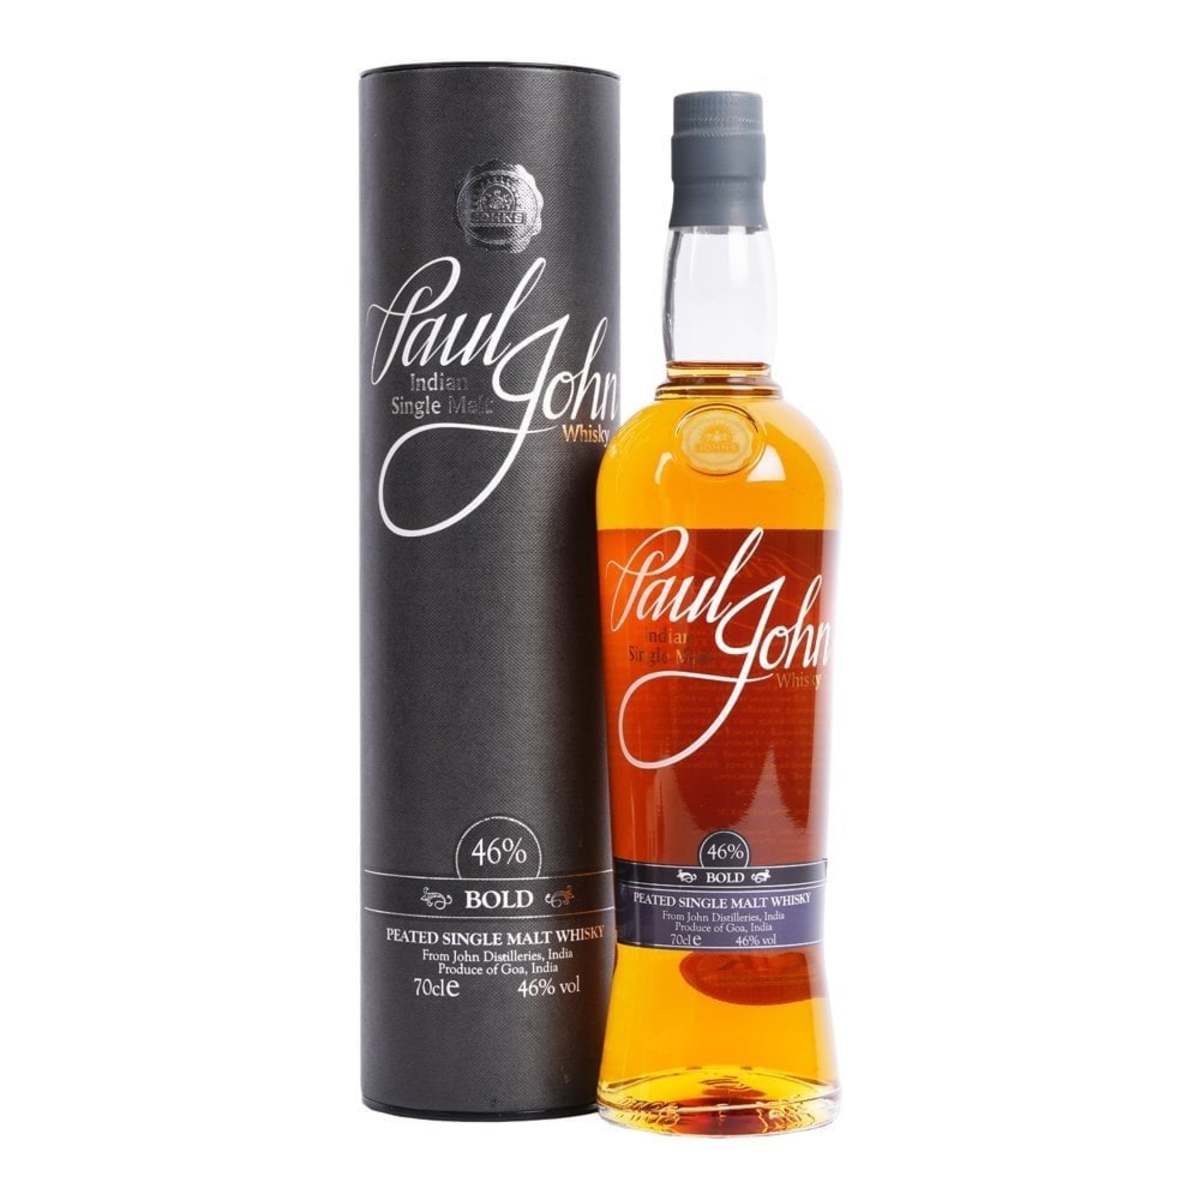 Introducing a Great Single Malt Whiskey from India: Paul John